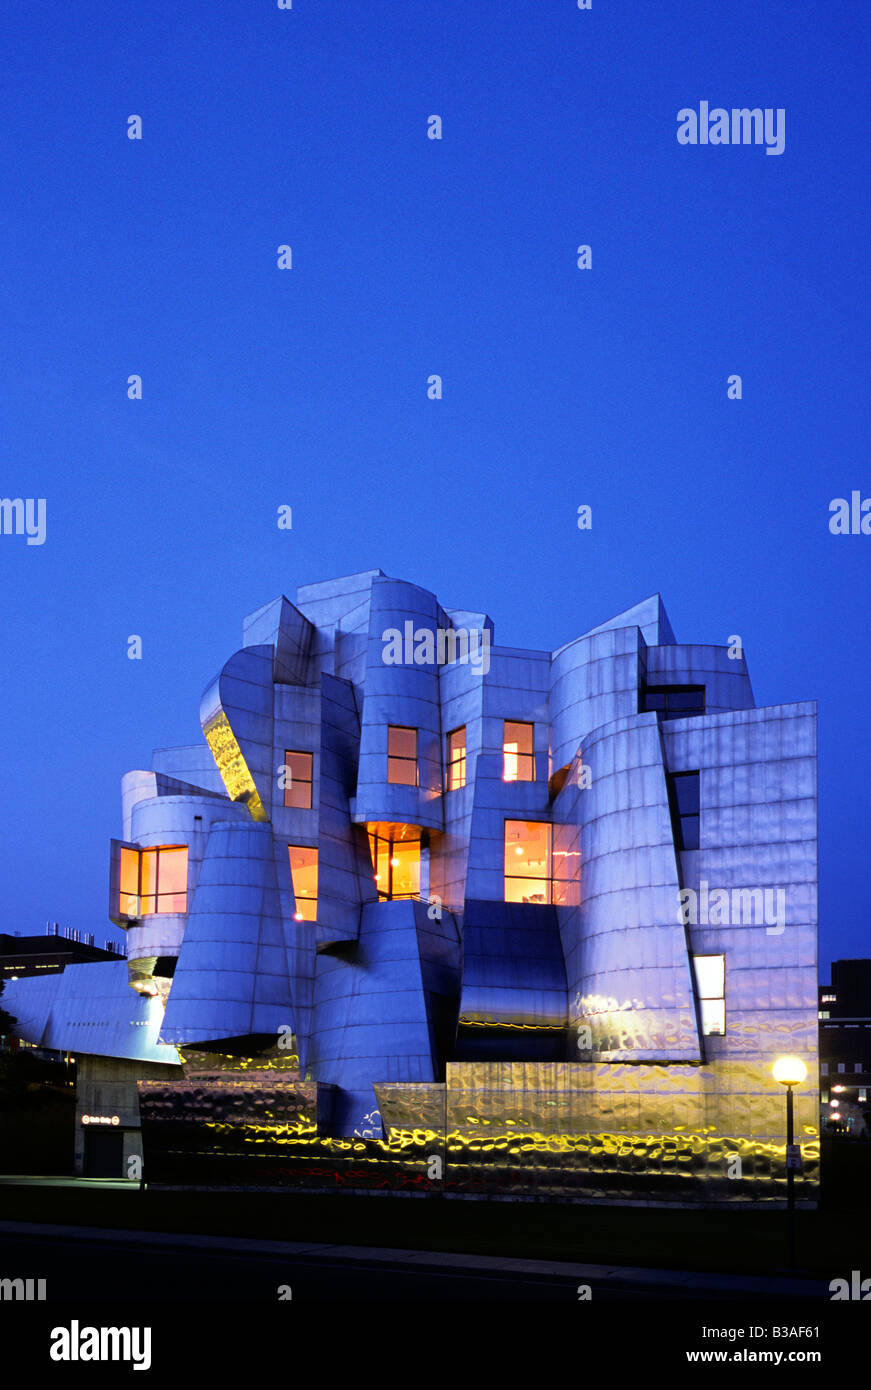 STAINLESS-STEEL CLAD FREDERICK R. WEISMAN MUSEUM IN MINNEAPOLIS, MINNESOTA.  ARCHITECT IS FRANK GEHRY. Stock Photo